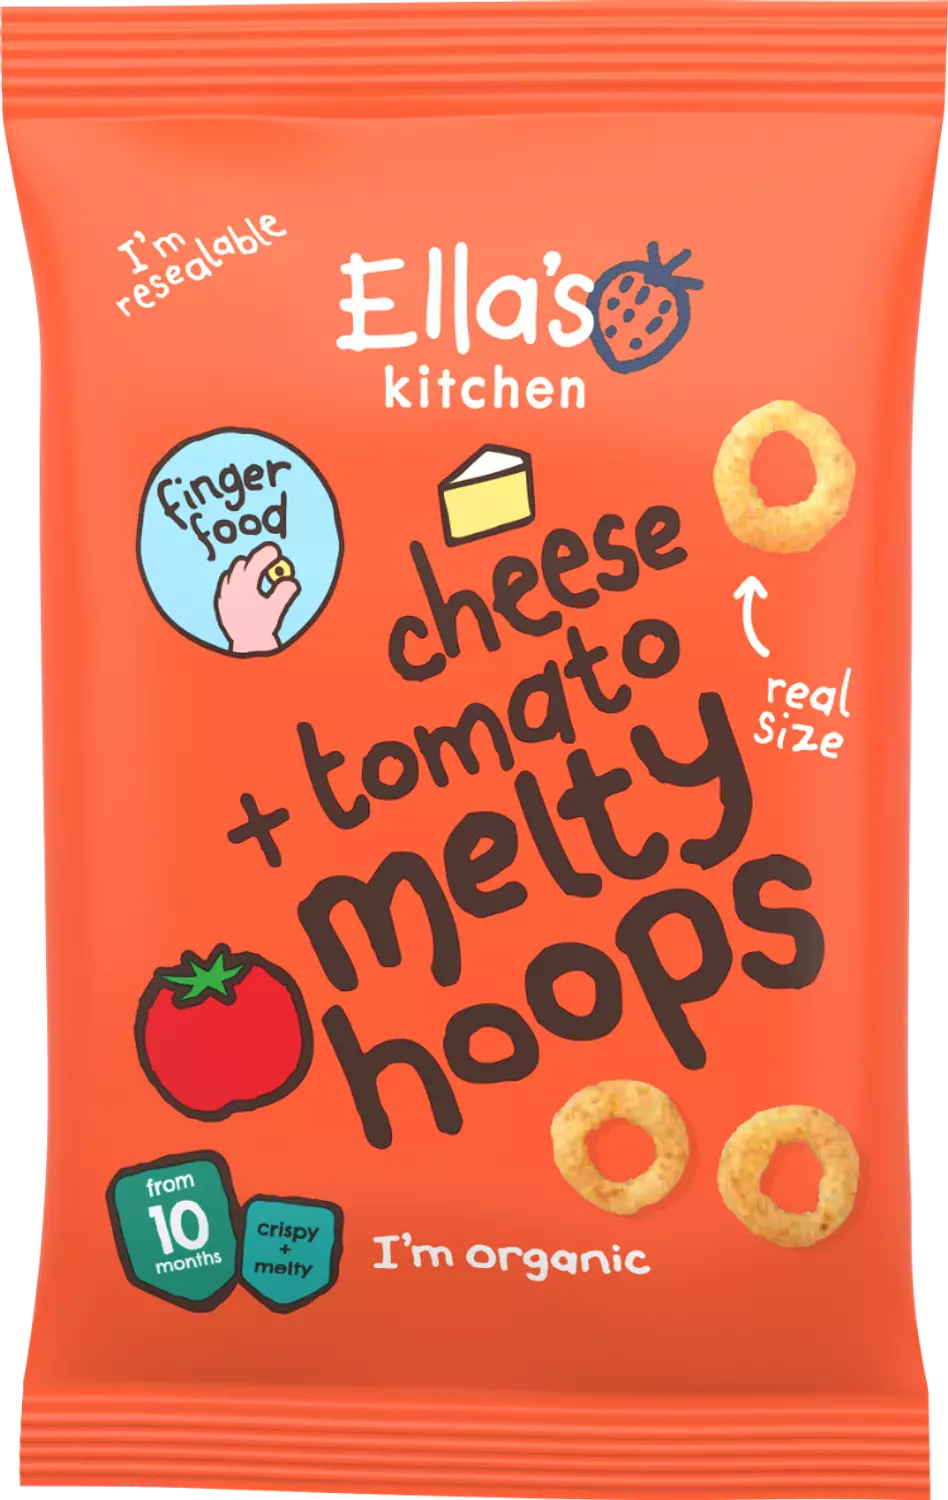 Cheese + tomato melty hoop - 20 grams  0